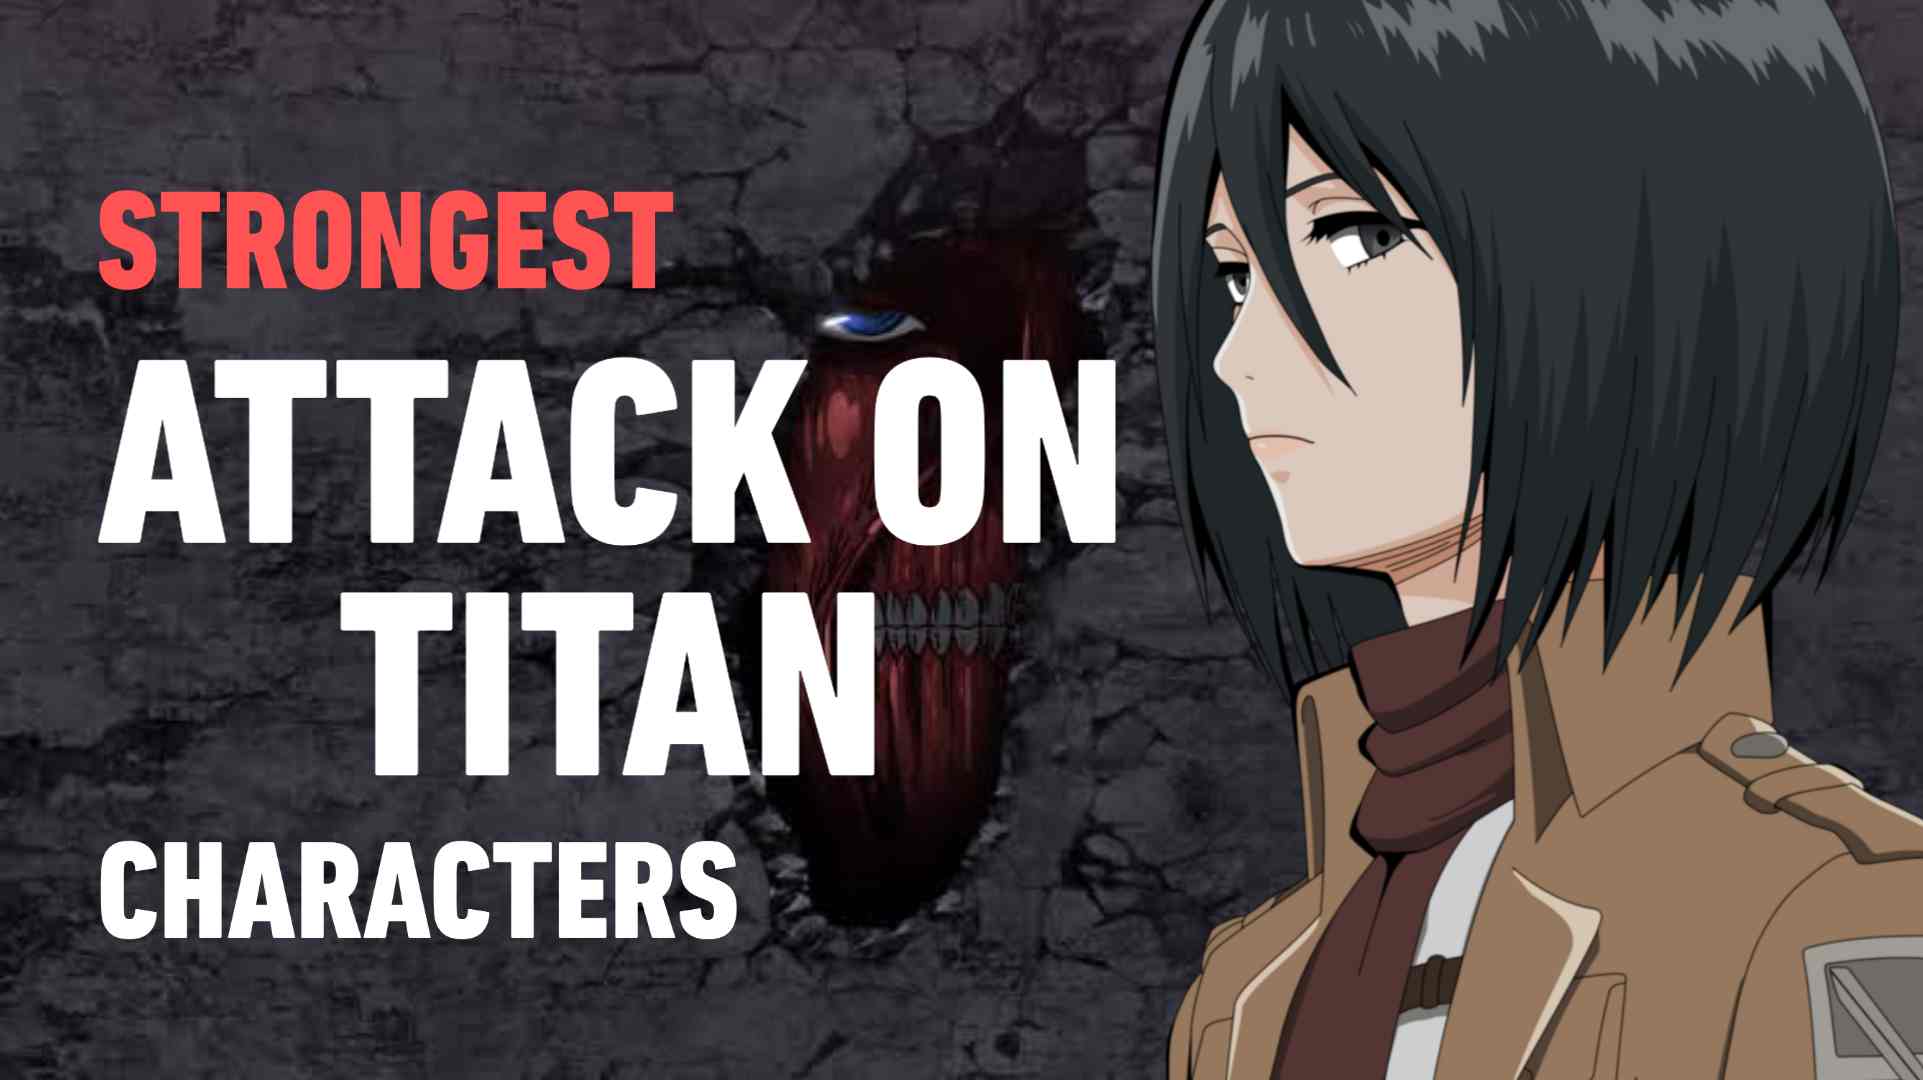 The Strongest Nontitan Characters in Attack on Titan